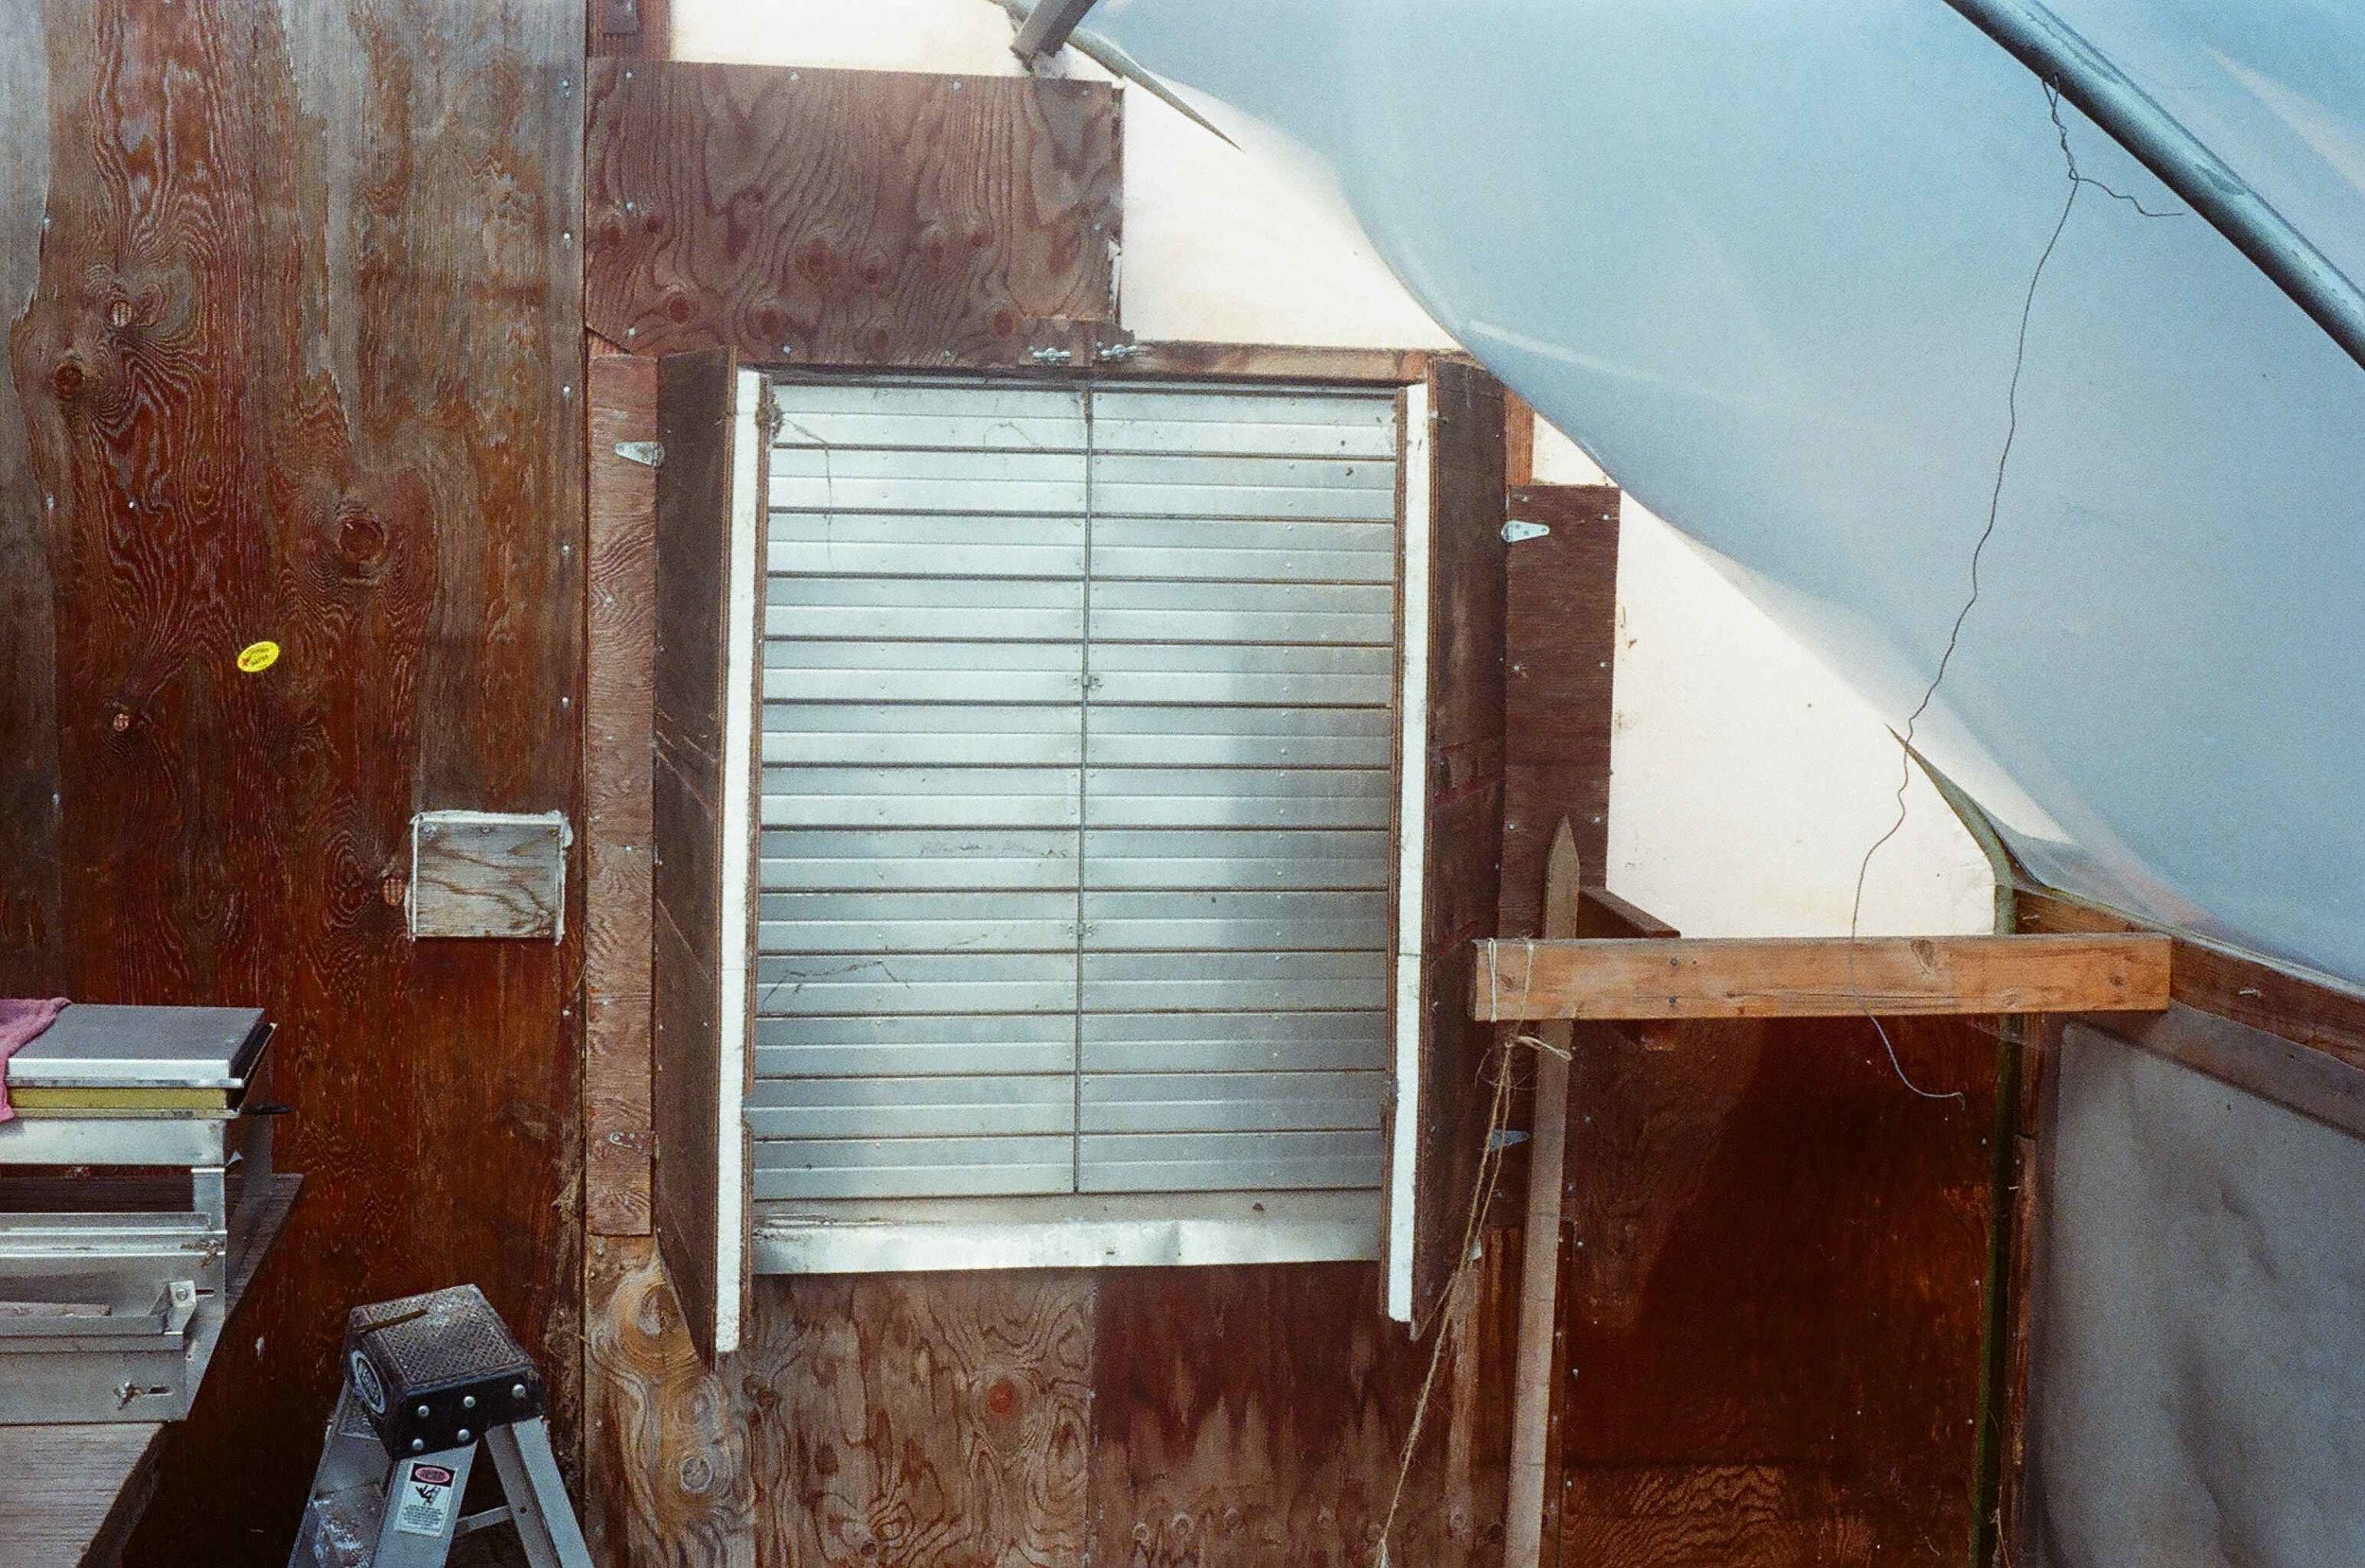  This air shutter allows fresh air into the greenhouse on warm days. The insulated doors are closed at night to prevent heat loss. The wooden end walls, surrounding the shutters, are also insulated. 